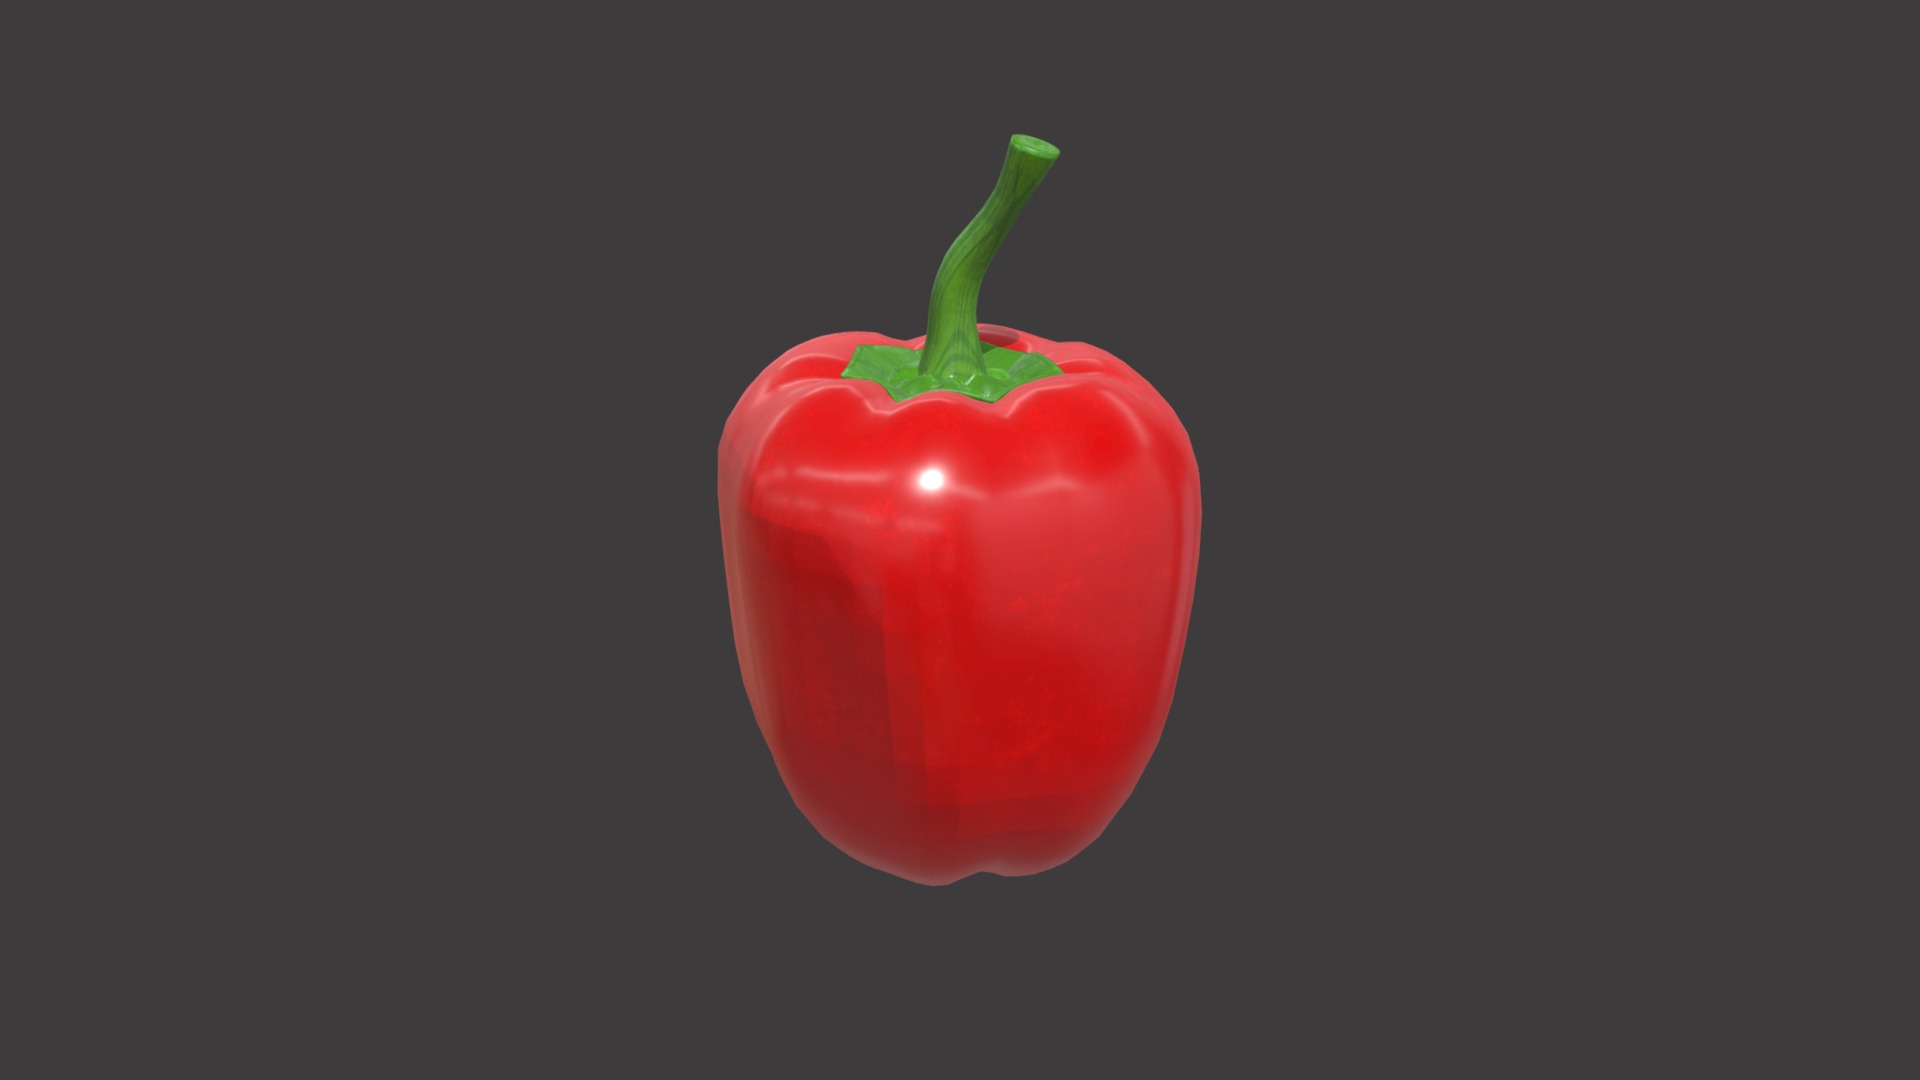 3D model Pepper bell red - This is a 3D model of the Pepper bell red. The 3D model is about a red pepper with a green stem.